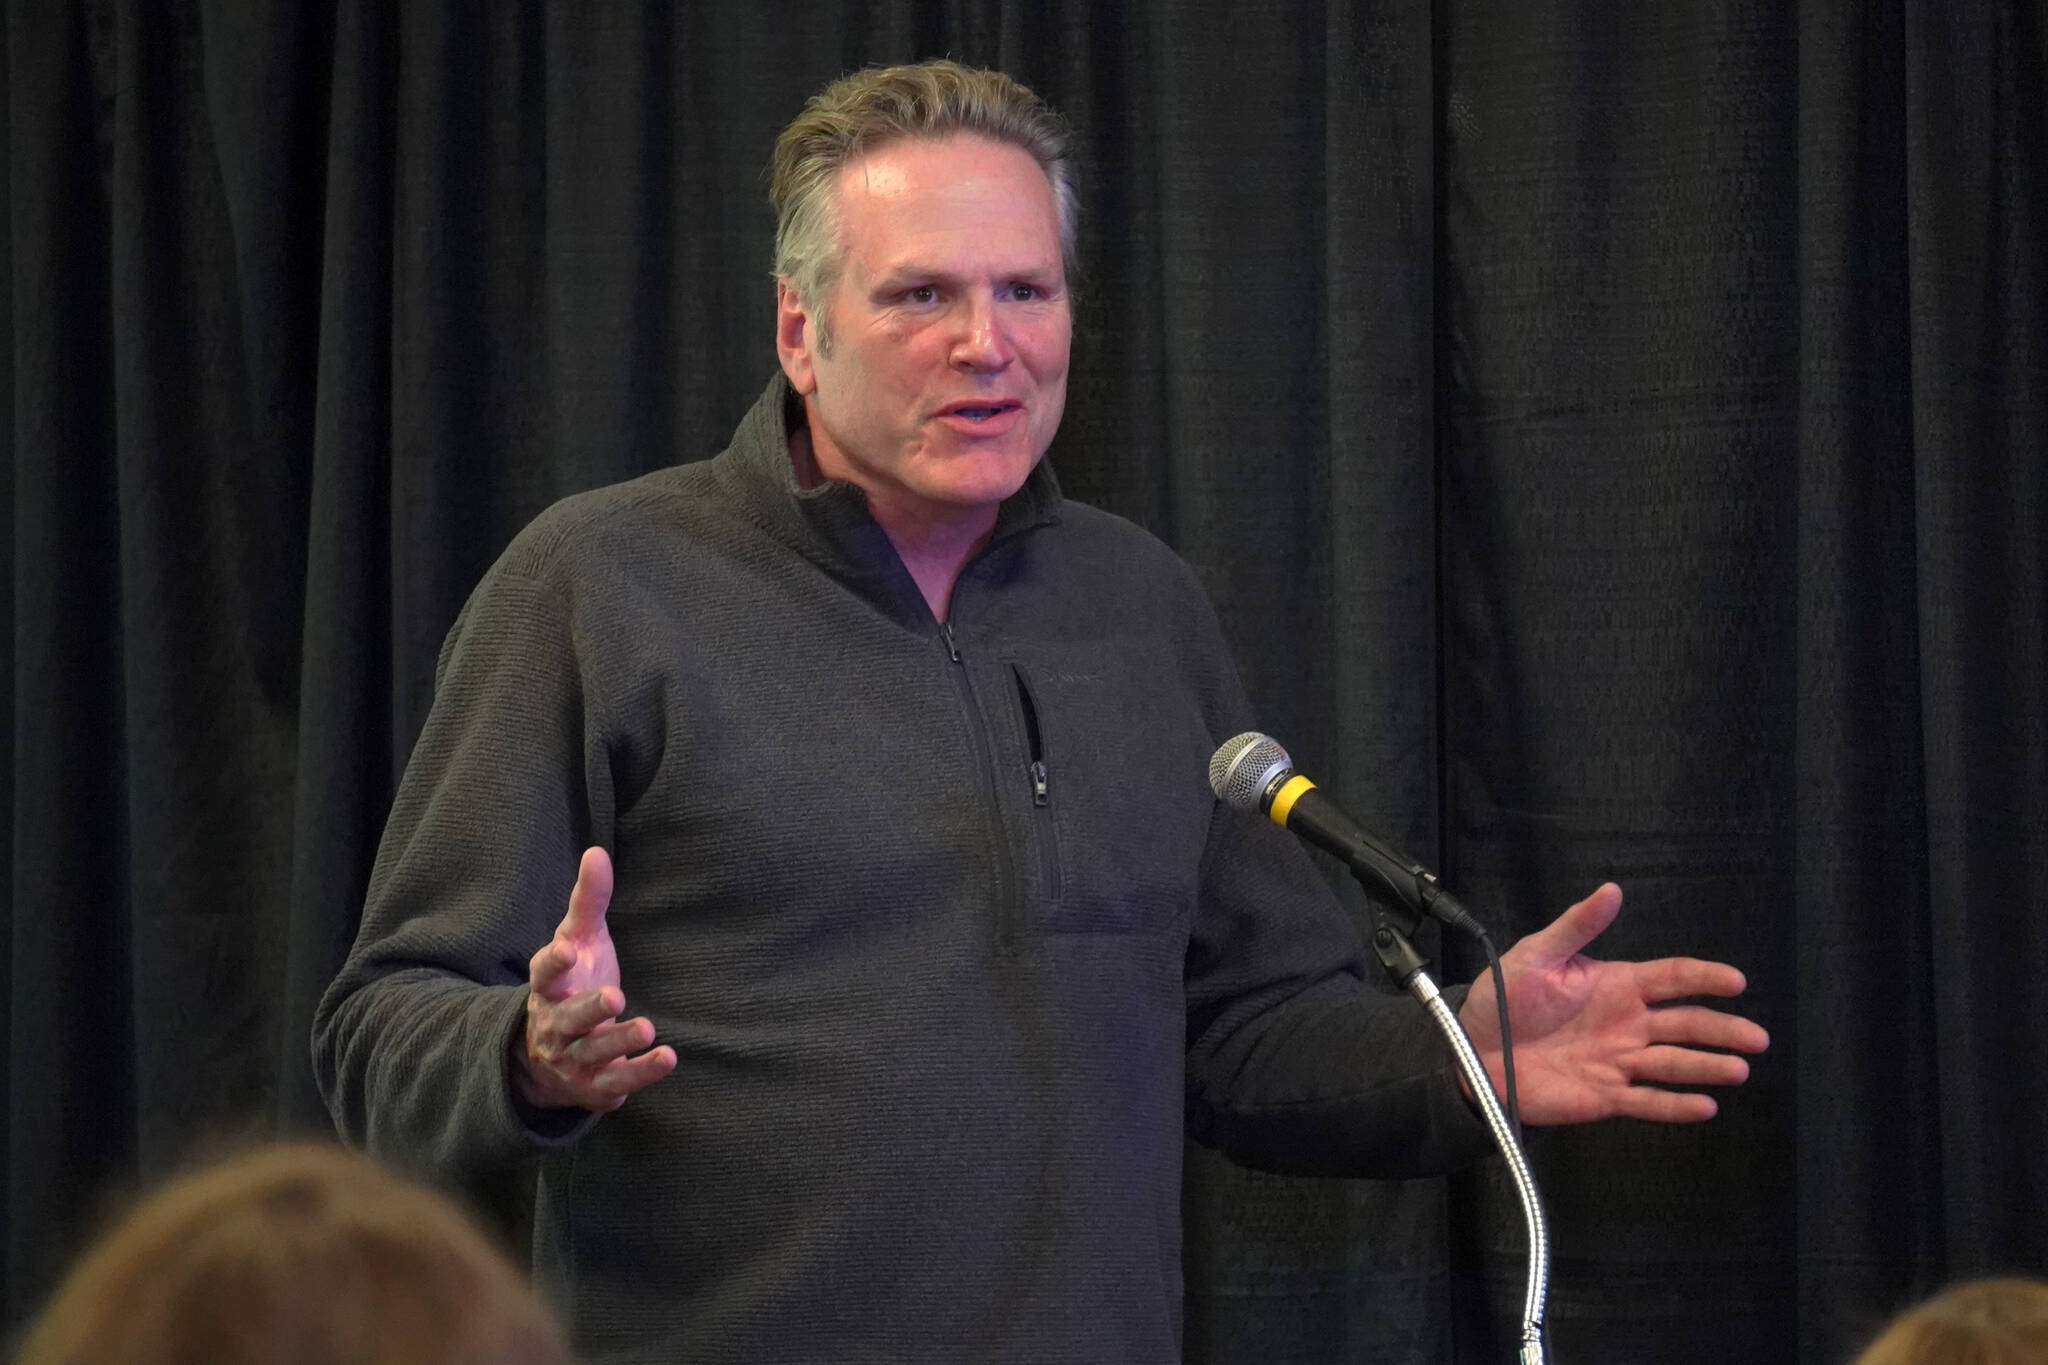 Gov. Mike Dunleavy delivers closing remarks at the Kenai River Sportfishing Association’s Kenai Classic Roundtable at the Soldotna Regional Sports Complex in Soldotna, Alaska, on Wednesday, Aug. 23, 2023. (Jake Dye/Peninsula Clarion)